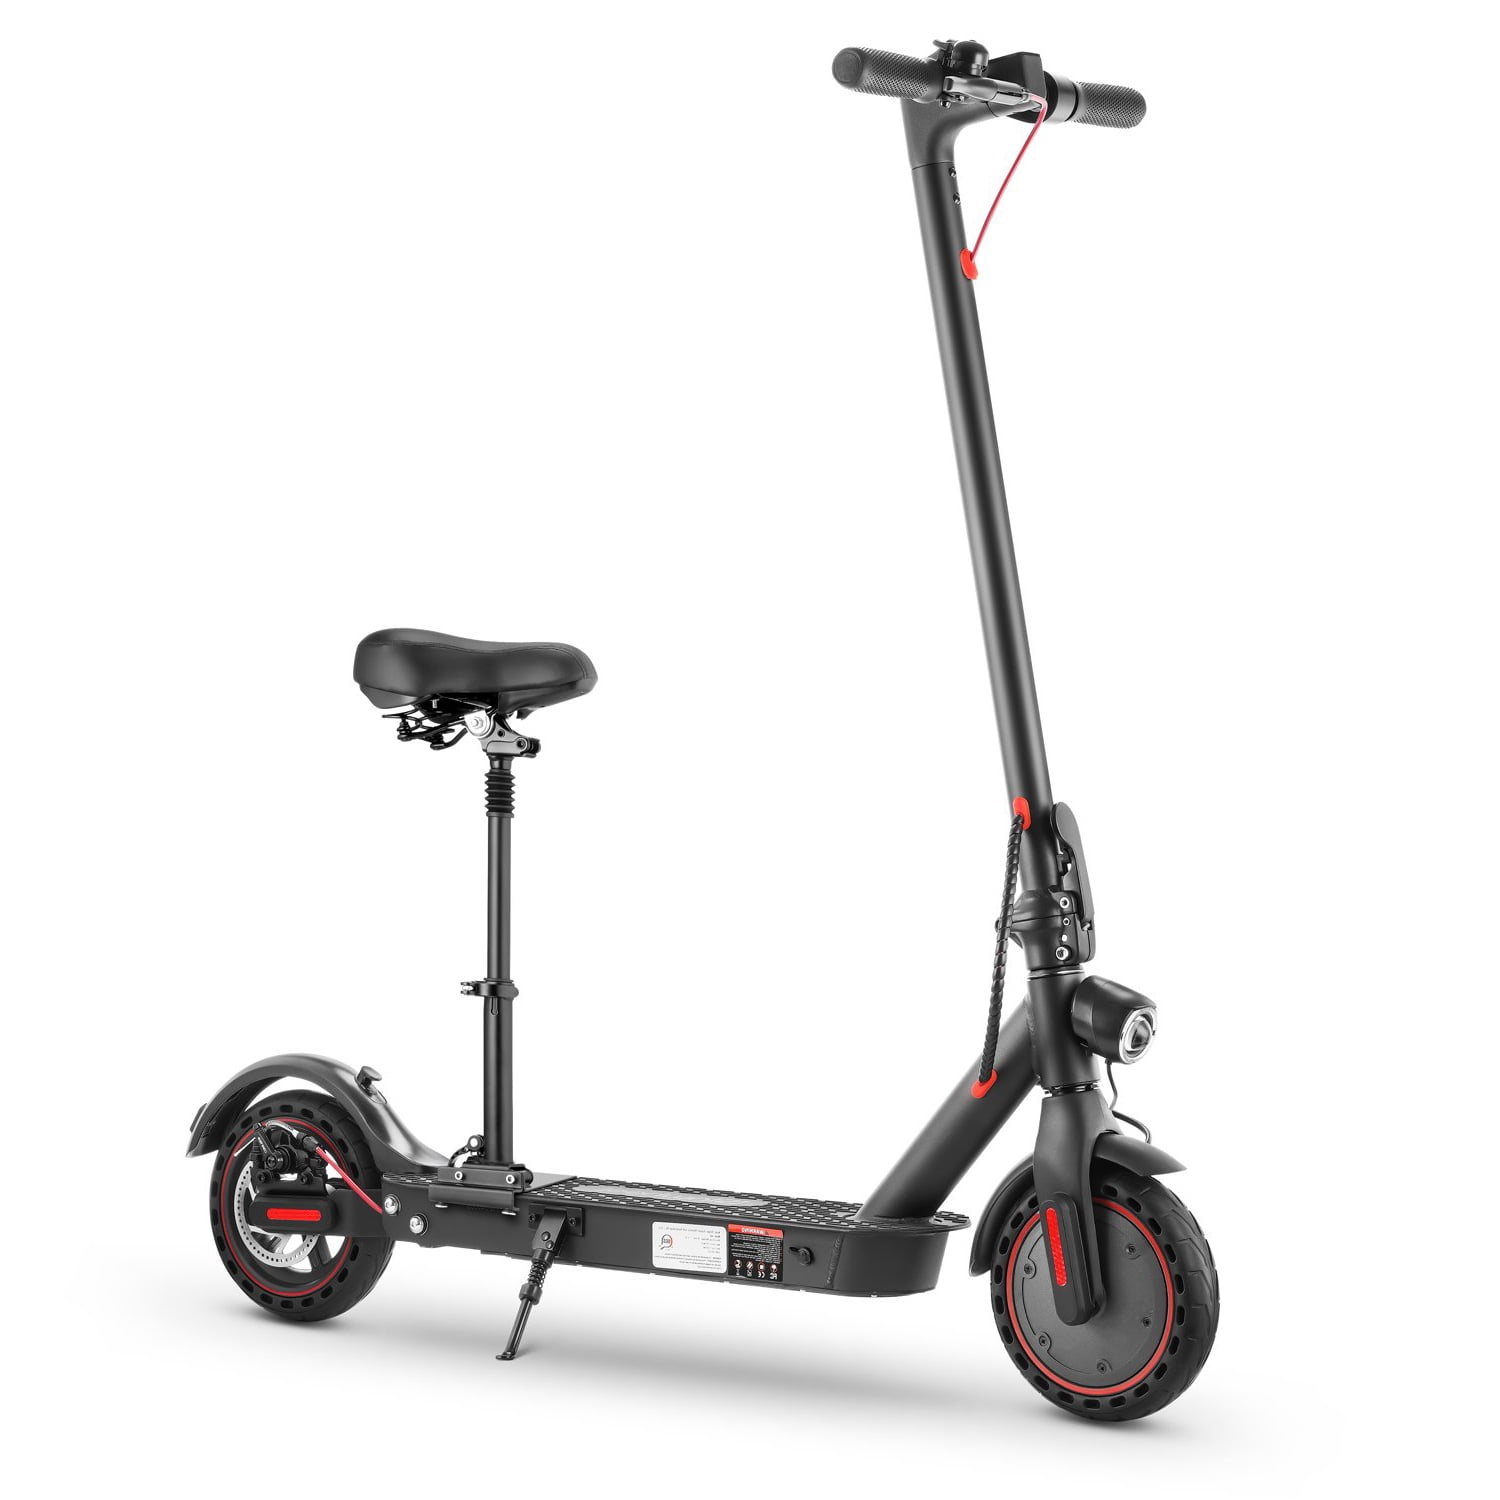 and 25km Long Range Comfortable and Portable Commuter Electric Scooter for Adults isinwheel i11 E Scooter with App Control 350W Motor Top Speed to 25km/h Electric Scooter